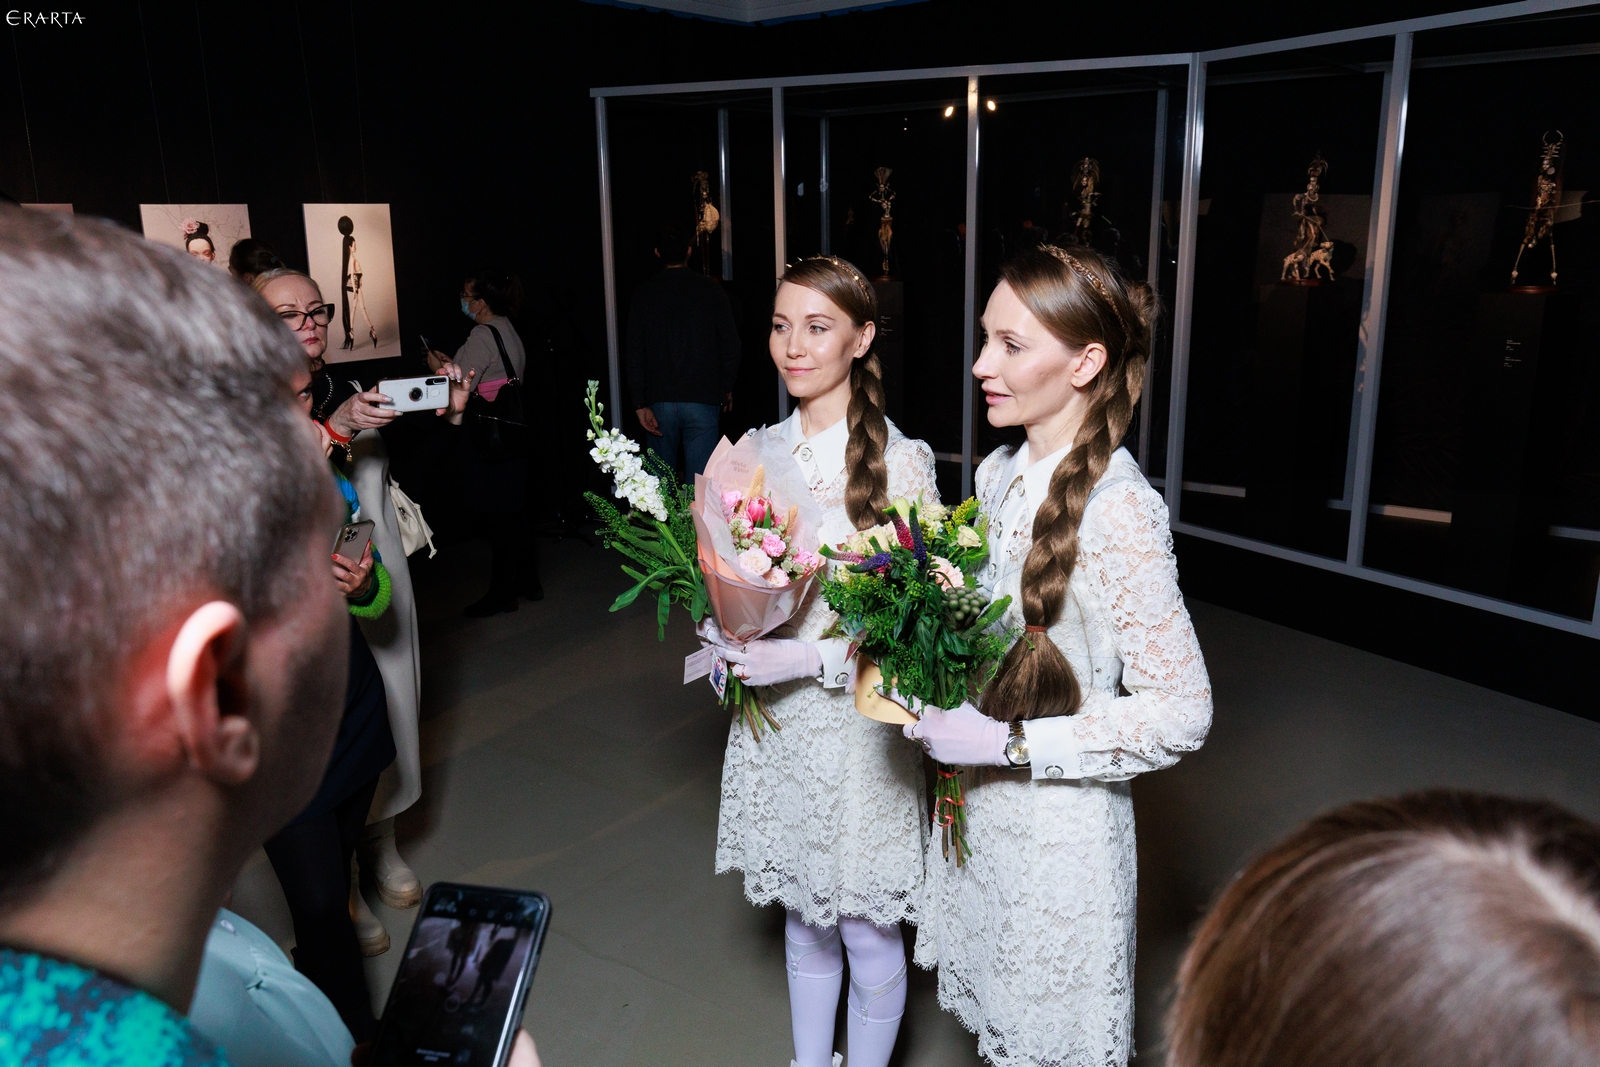 Photo Report: Private View of the Popovy Sisters’ Exhibition